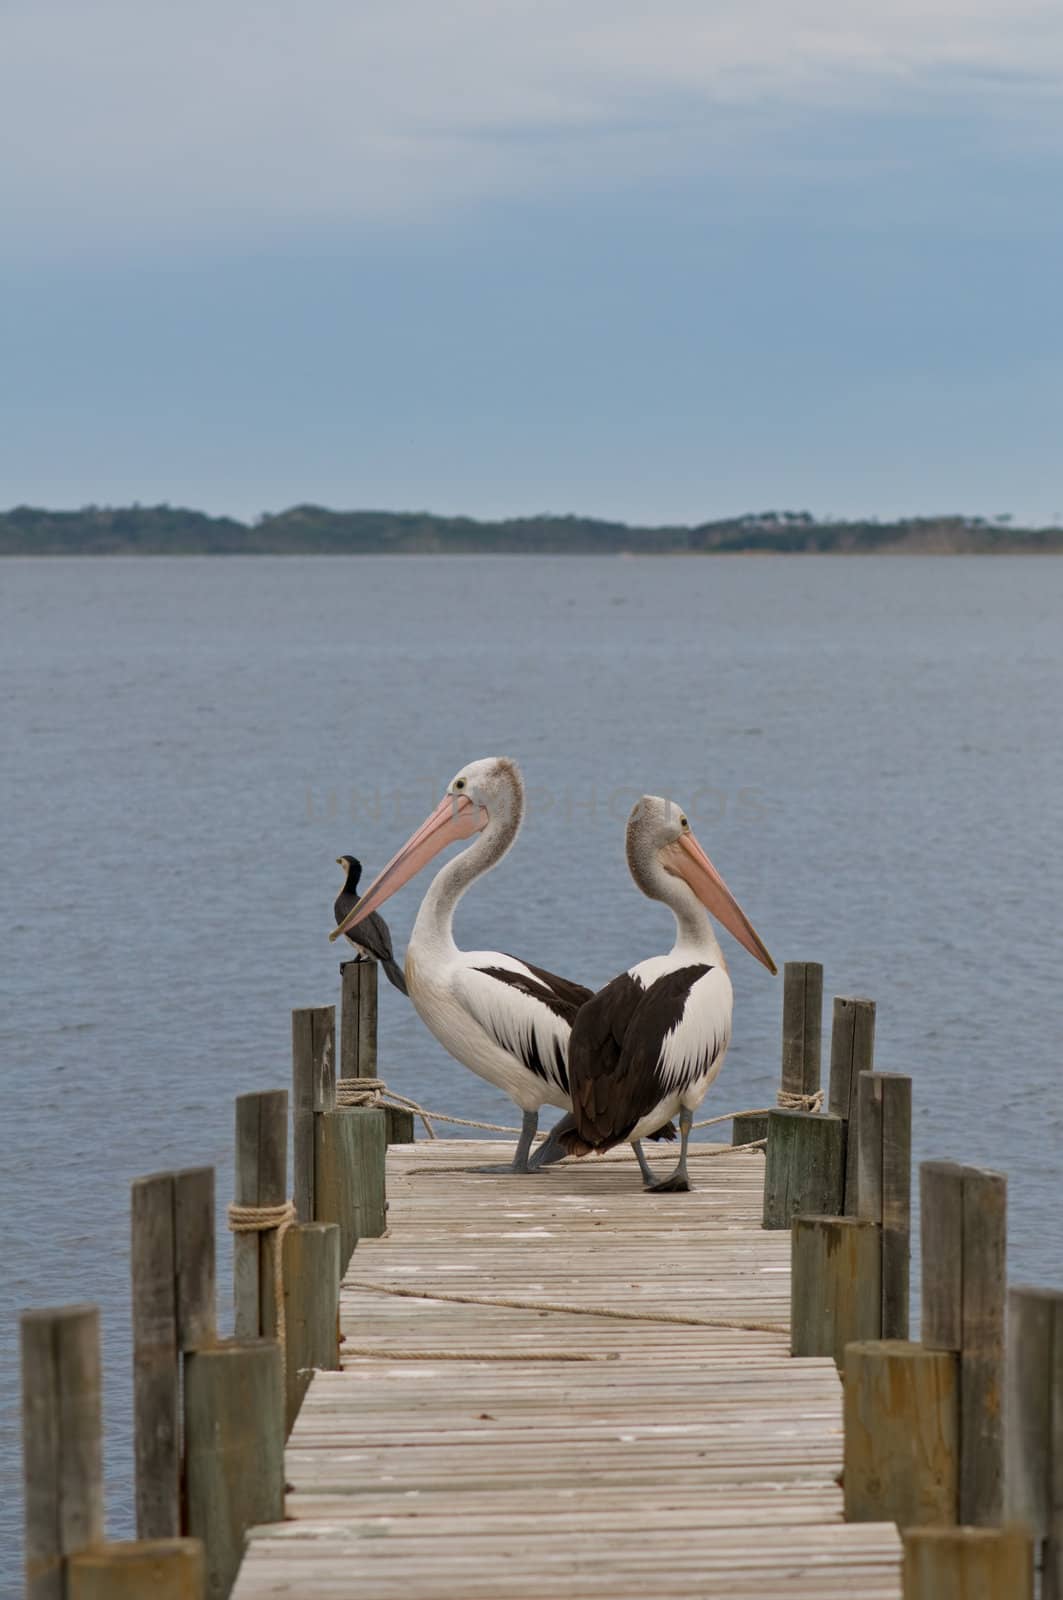 Two pelican birds on a timber landing pier with another bird 